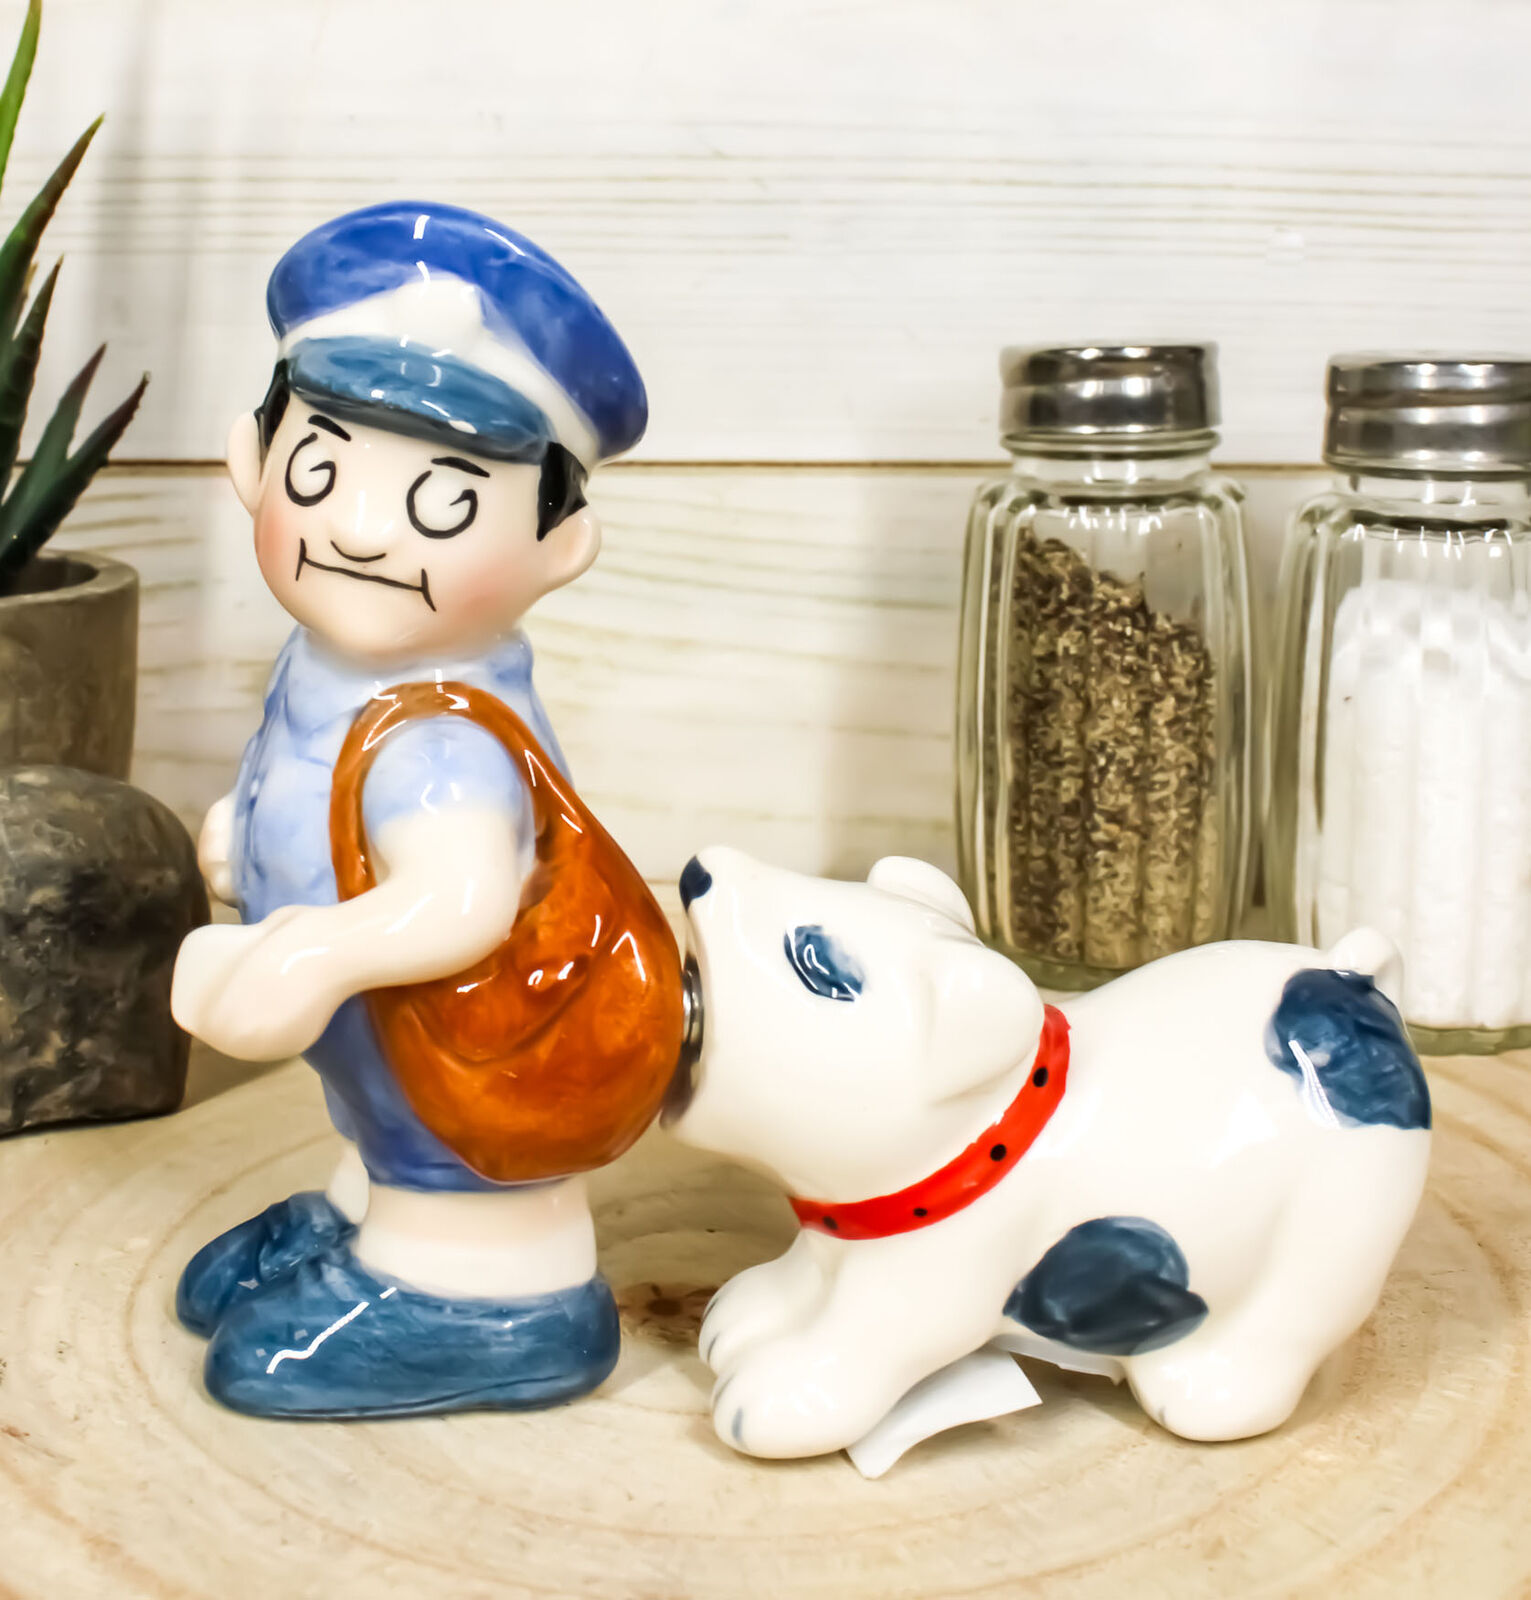 Ceramic Postman With Mail Thief Tramp Dog Salt And Pepper Shakers Figurine Set